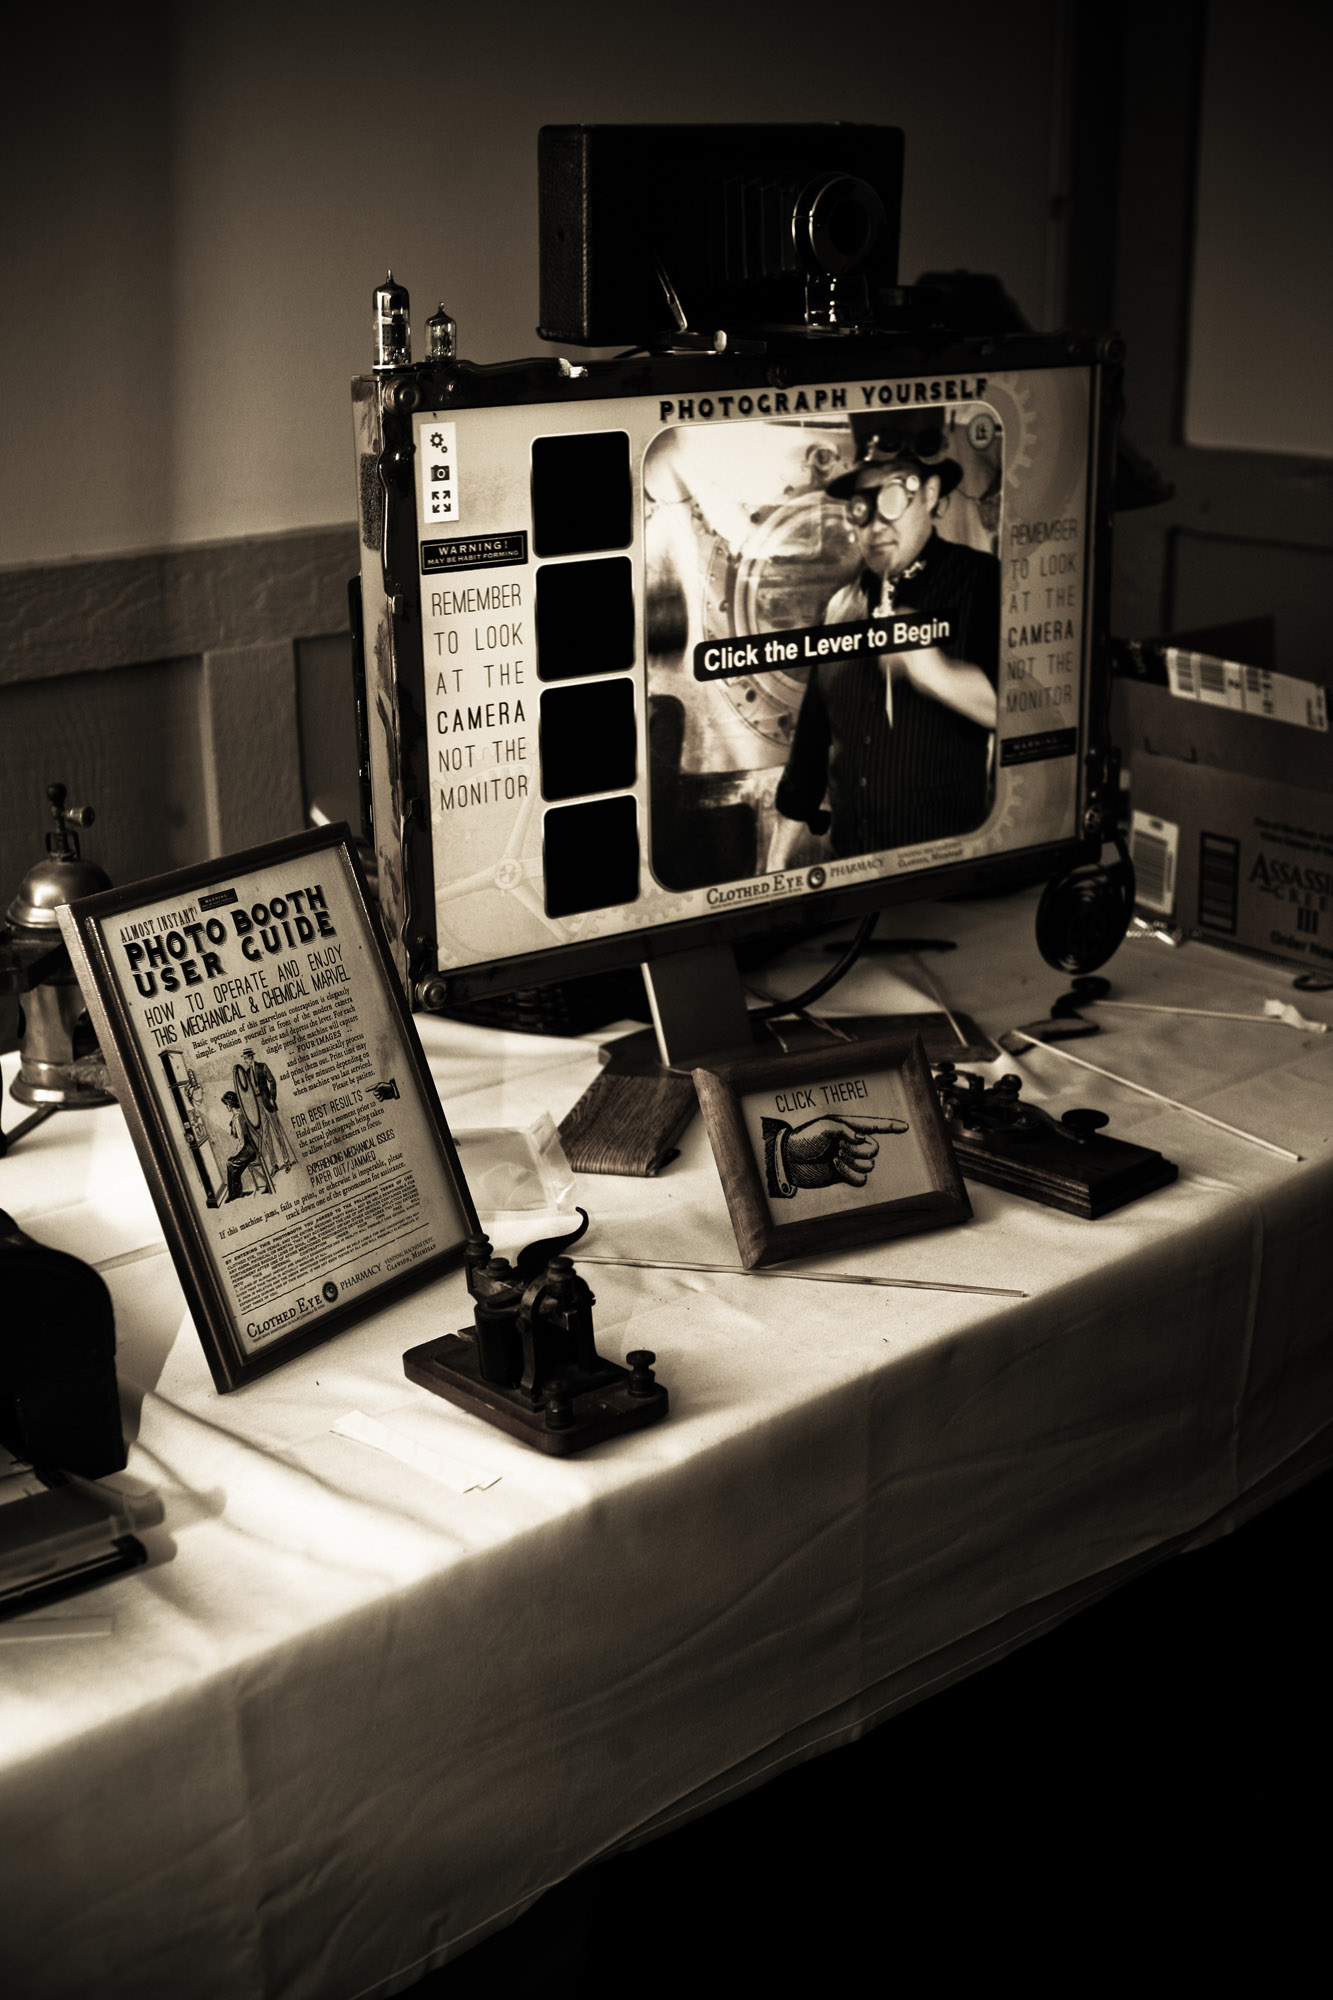 Detail of Photo Booth setup including camera, monitor, and signage